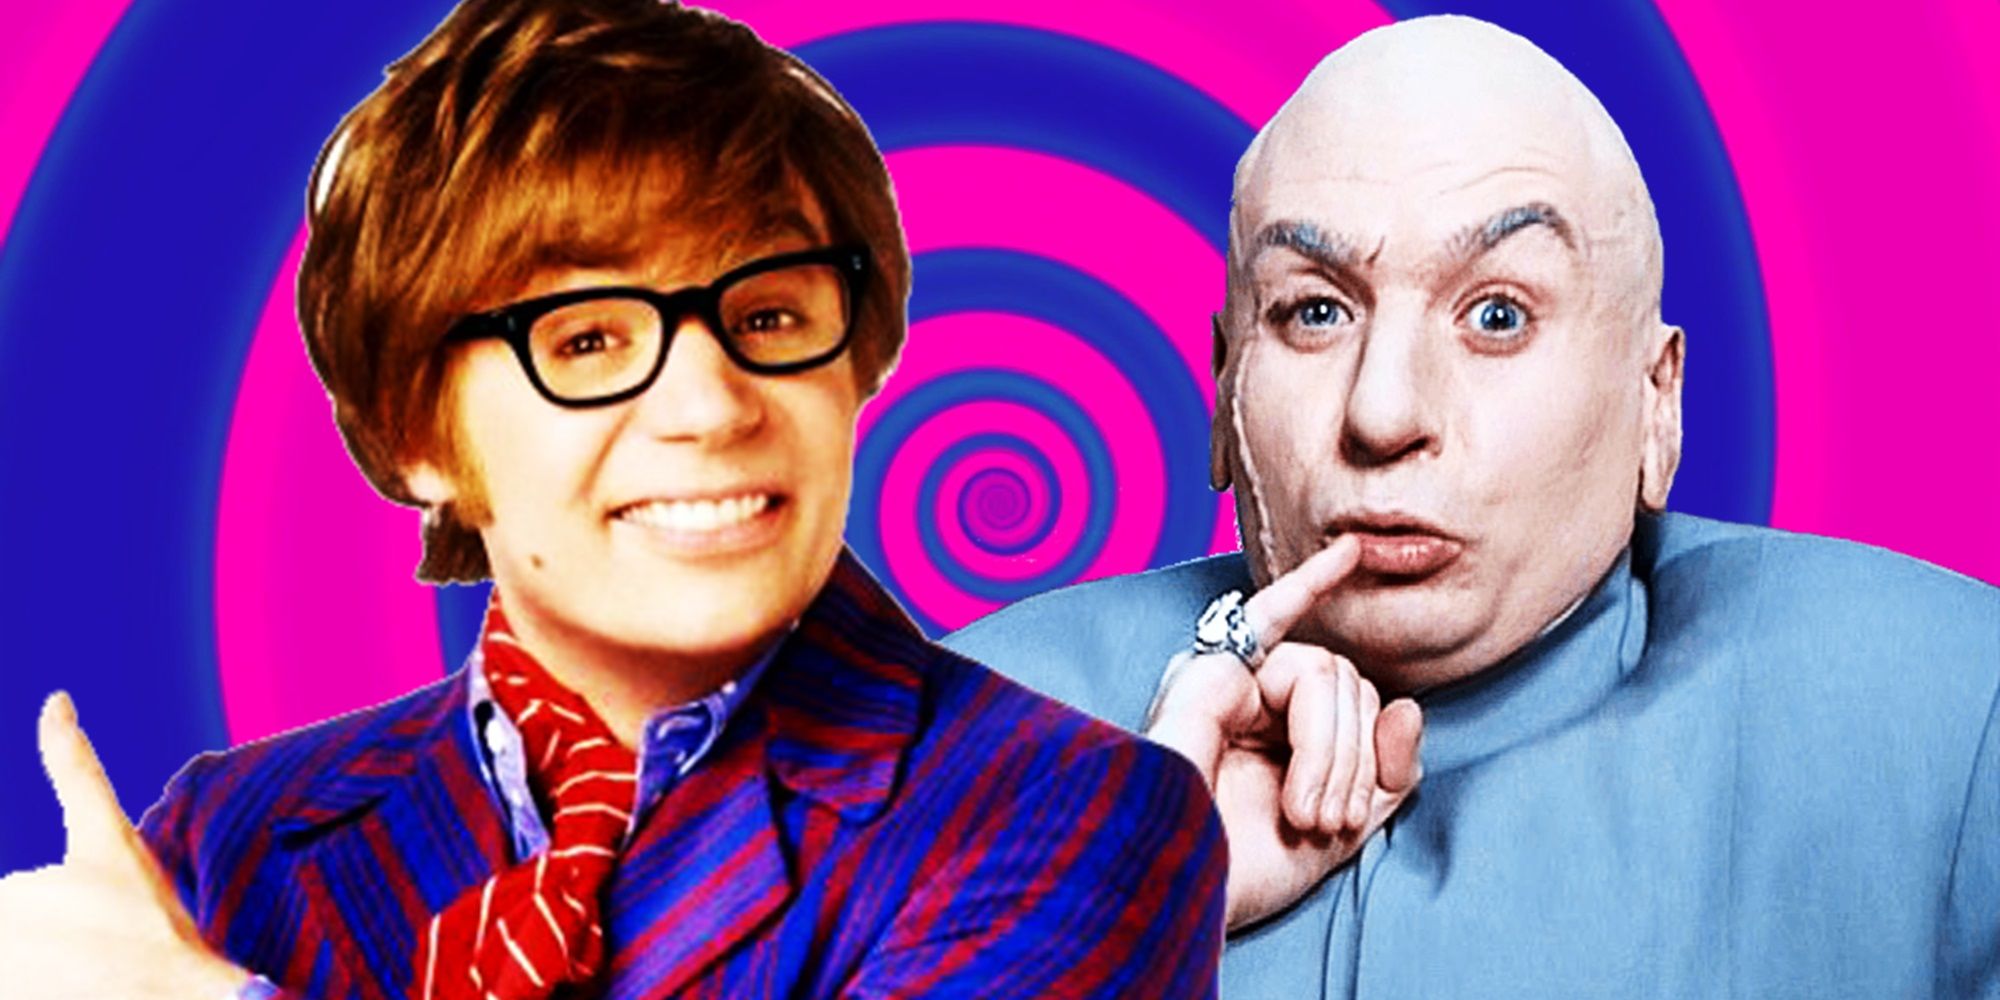 How To Watch The Austin Powers Movies In Order